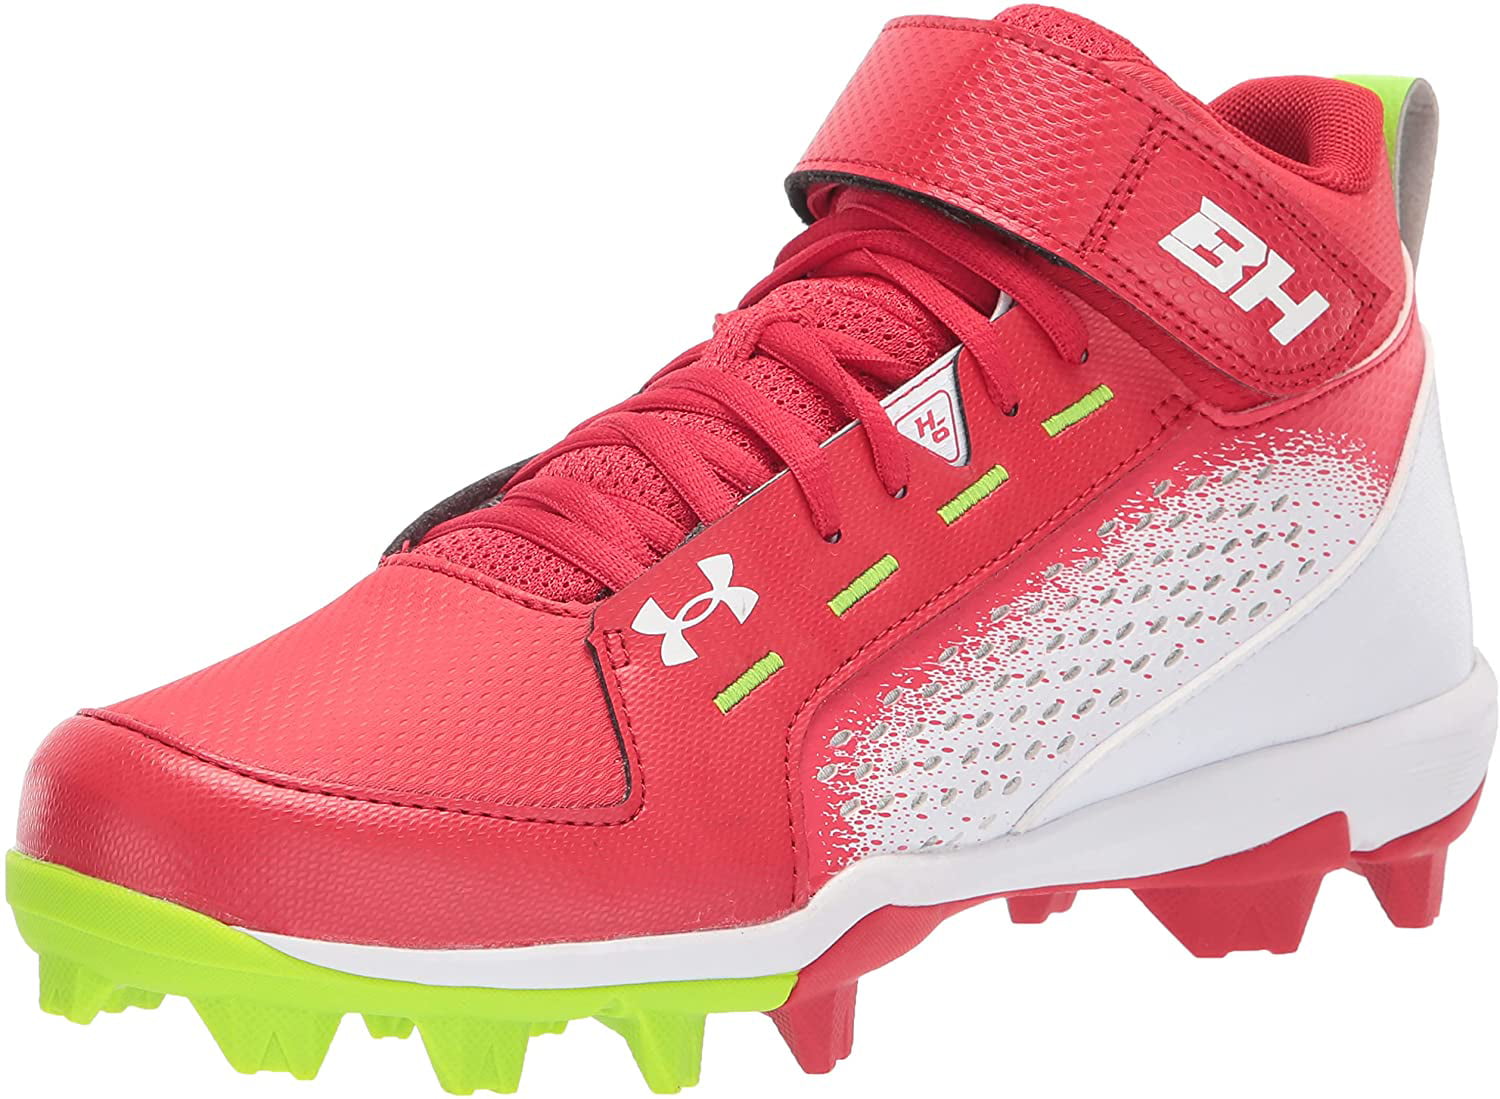 Limited Edition Baseball Shoe Under Armour Boy's Harper 6 Mid Rm Jr 